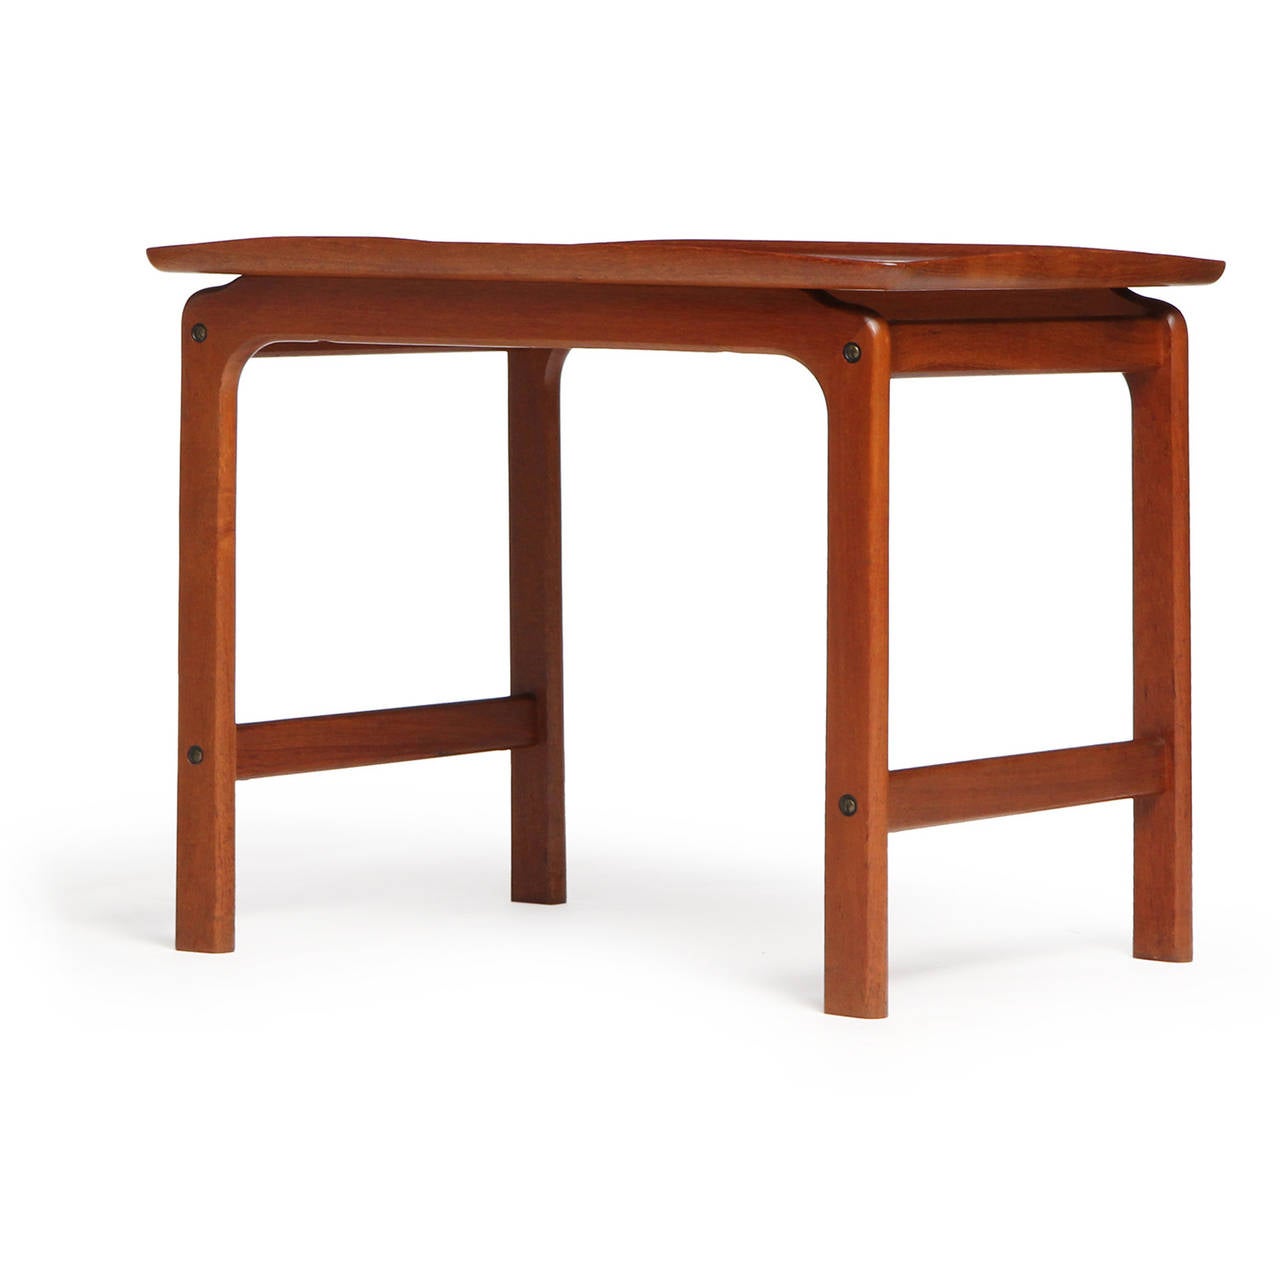 A finely crafted Scandinavian Modern occasional table or end table in highly figured warm toned teak. Finely honed curved edges. Designed by Peter Hvidt and Orla Molgaard-Nielsen, produced in Denmark, circa 1950s.